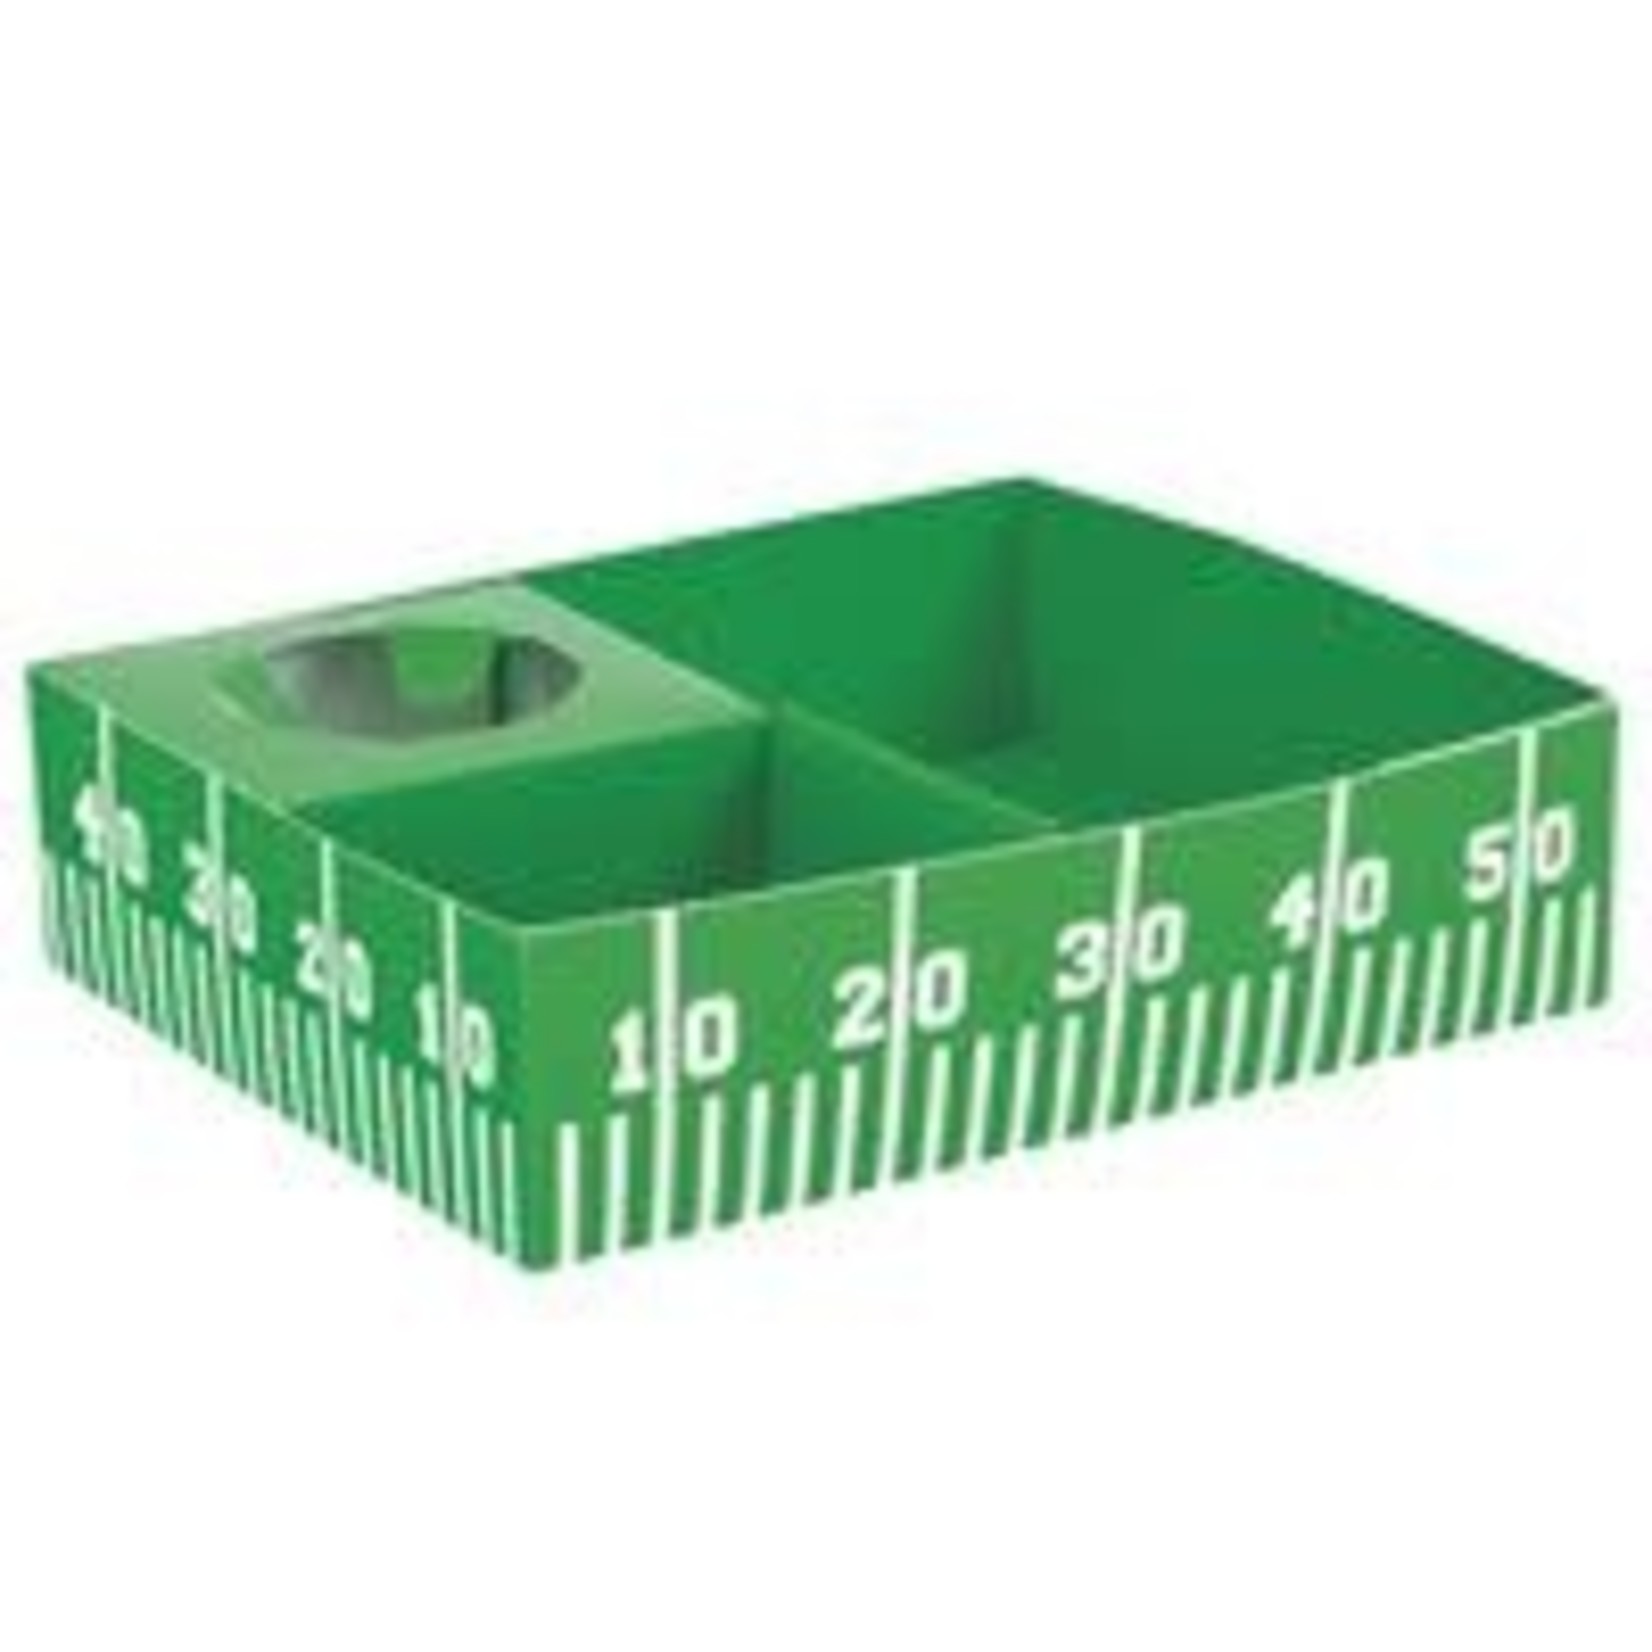 unique Football Food Tray Boxes - 2ct.